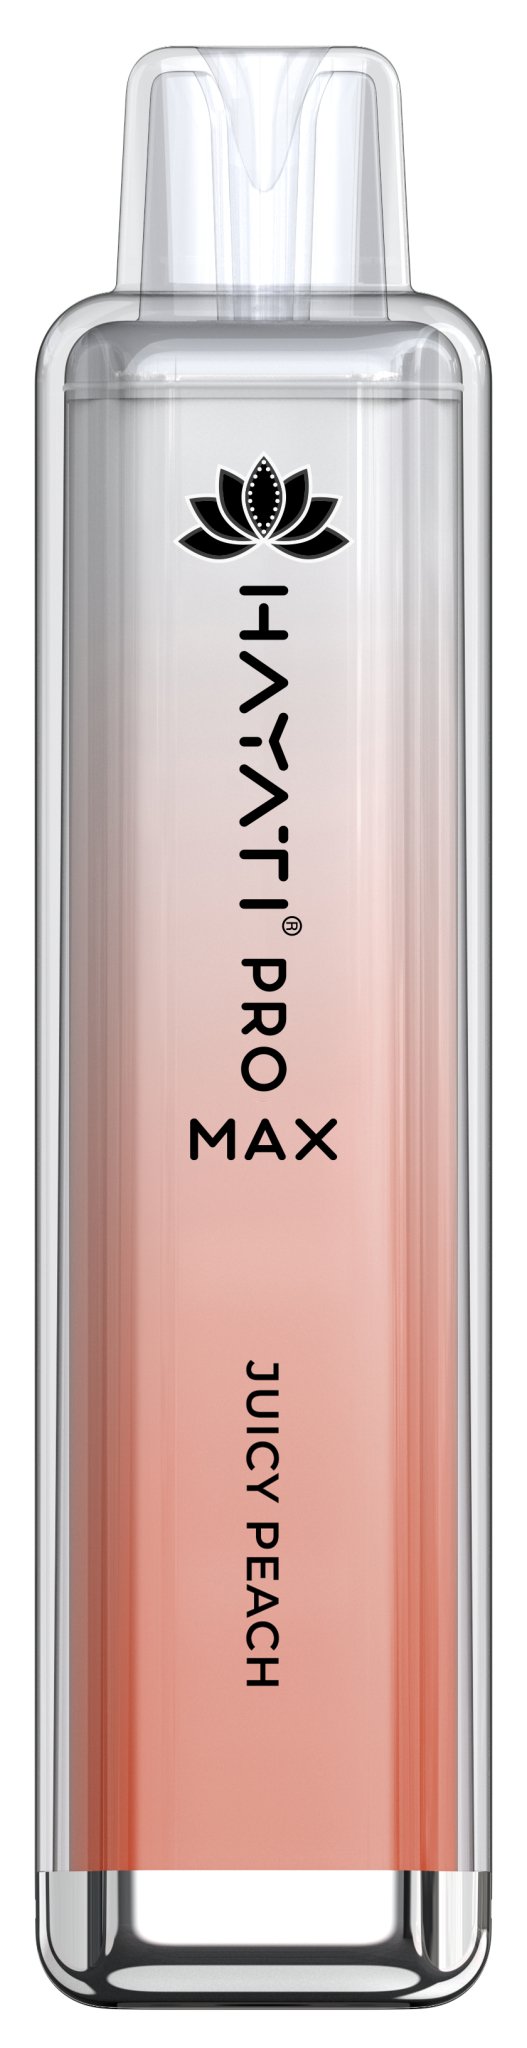 The Crystal Pro Max 4000 By Hayatti | Disposable Vape Pod Puff Device - Wolfvapes.co.uk-Juicy Peach